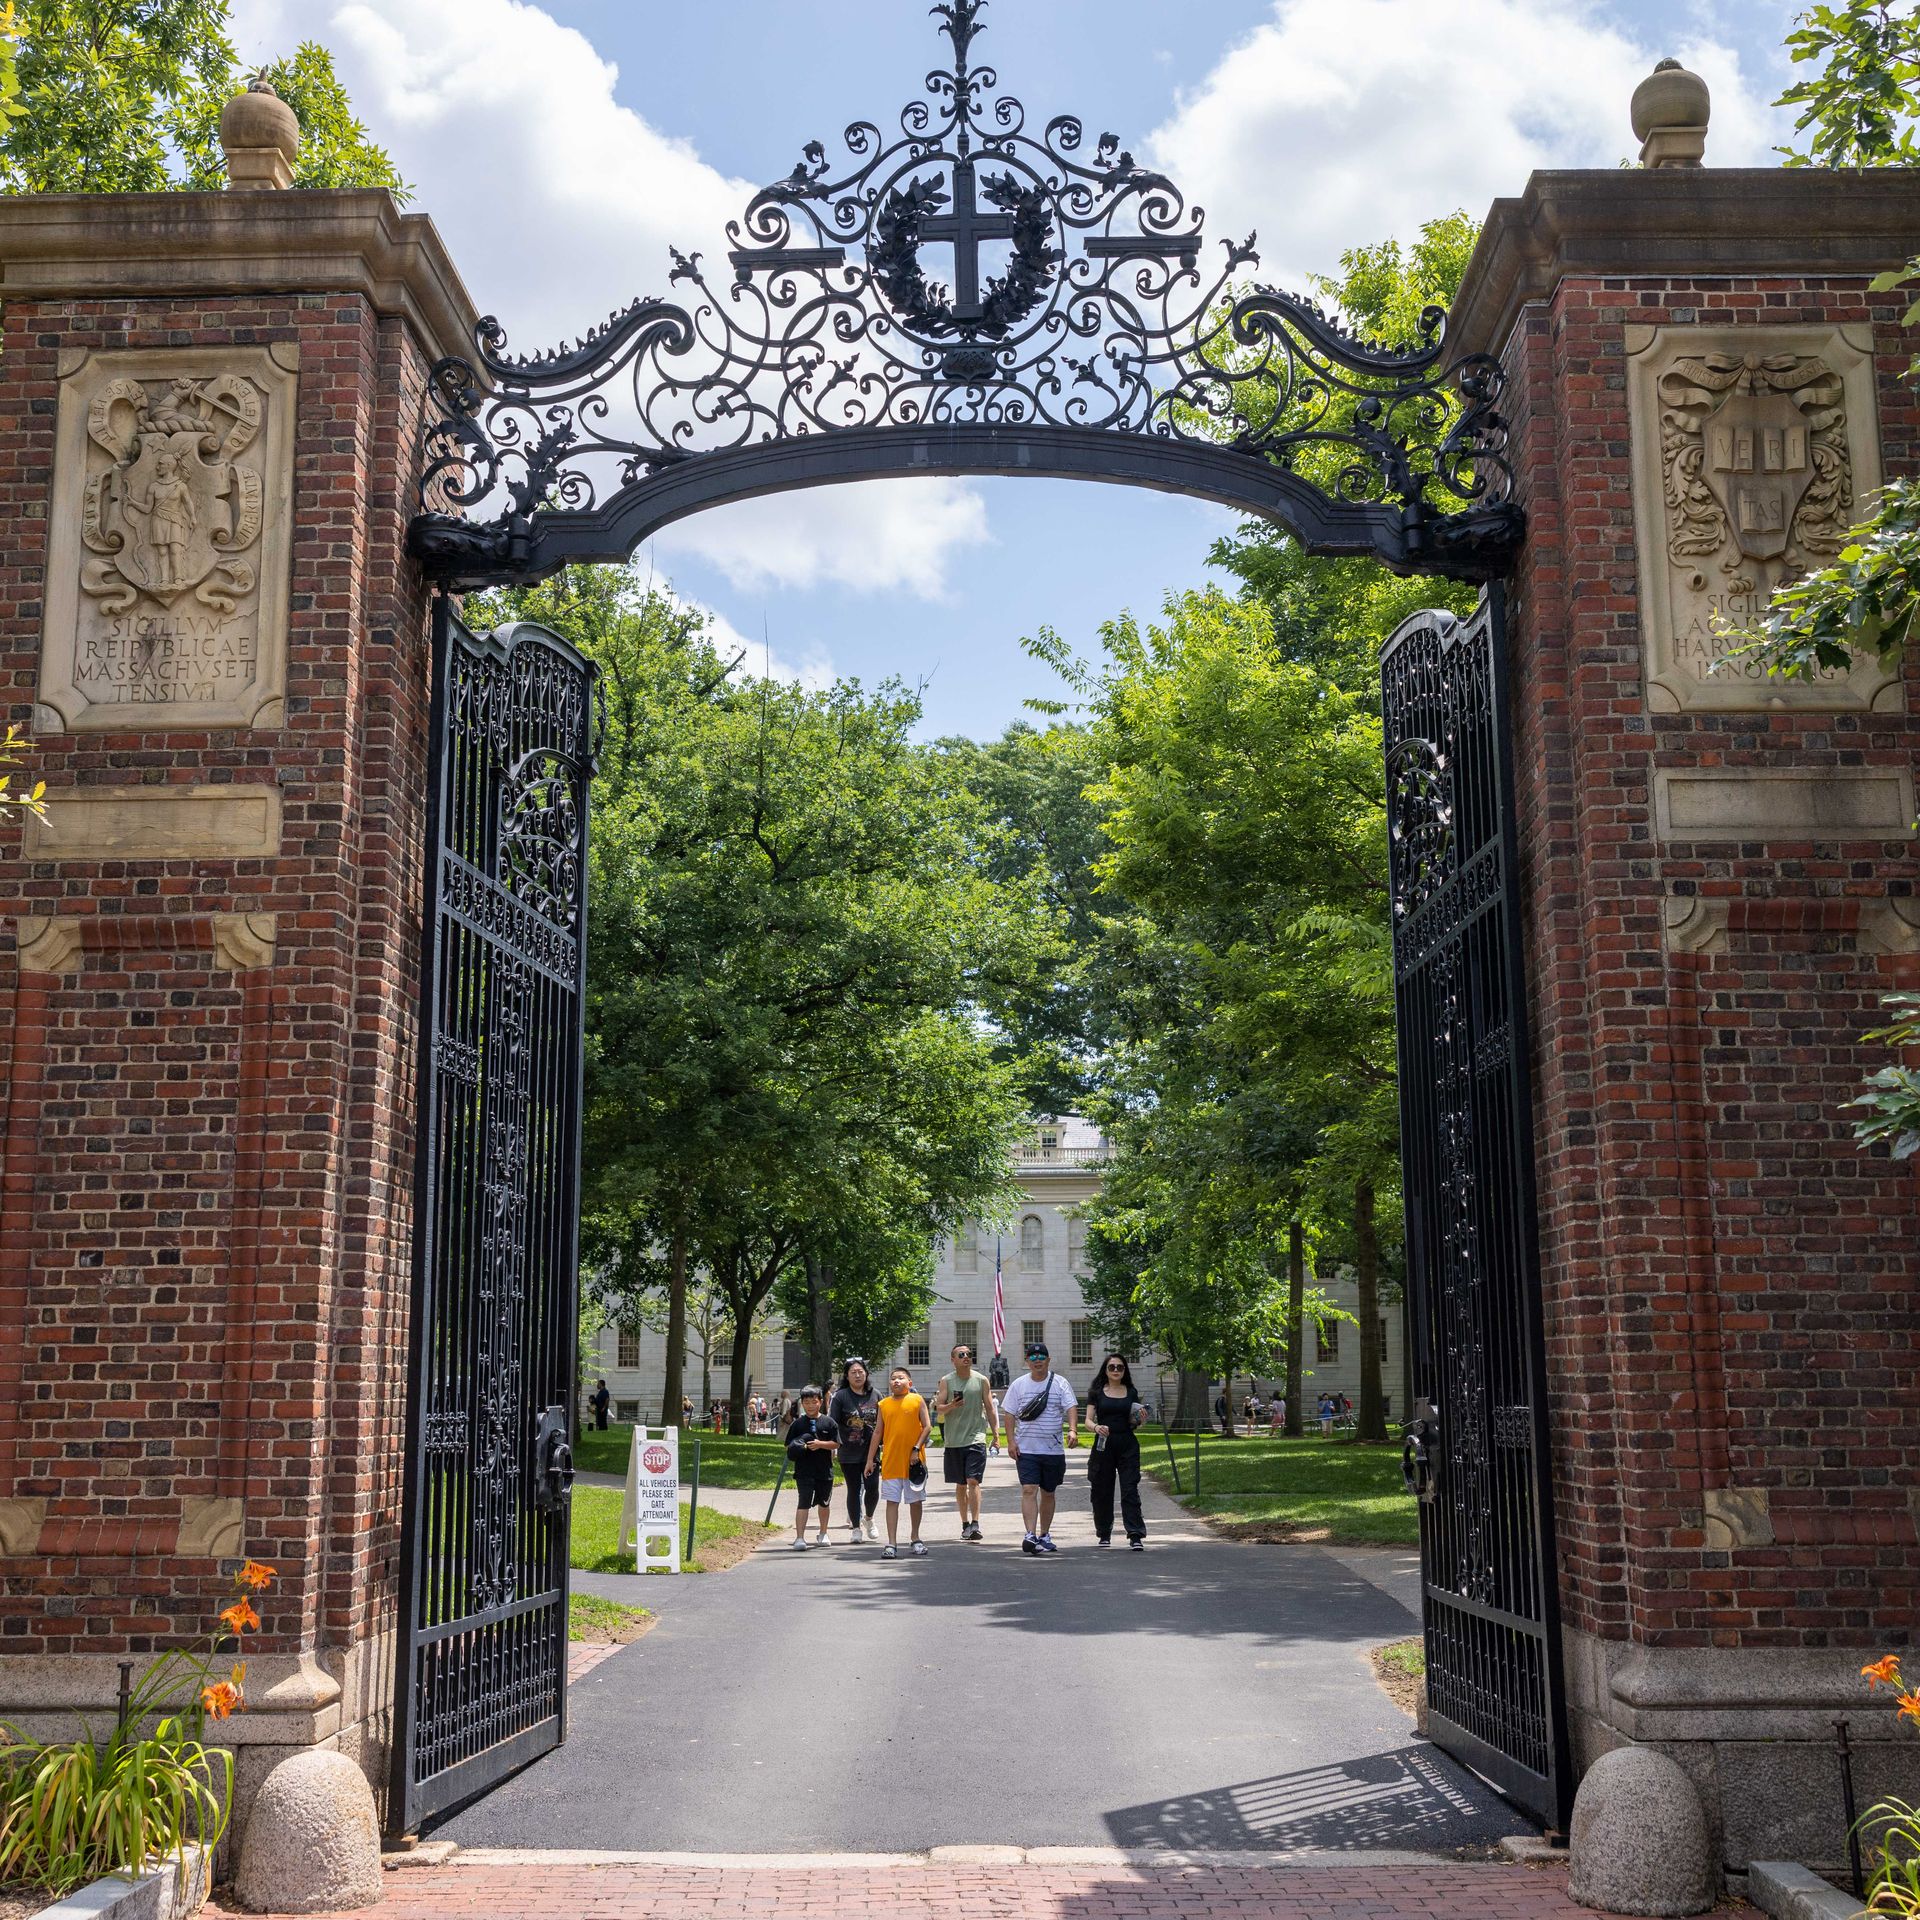 The Anguished Fallout from a Pro-Palestinian Letter at Harvard